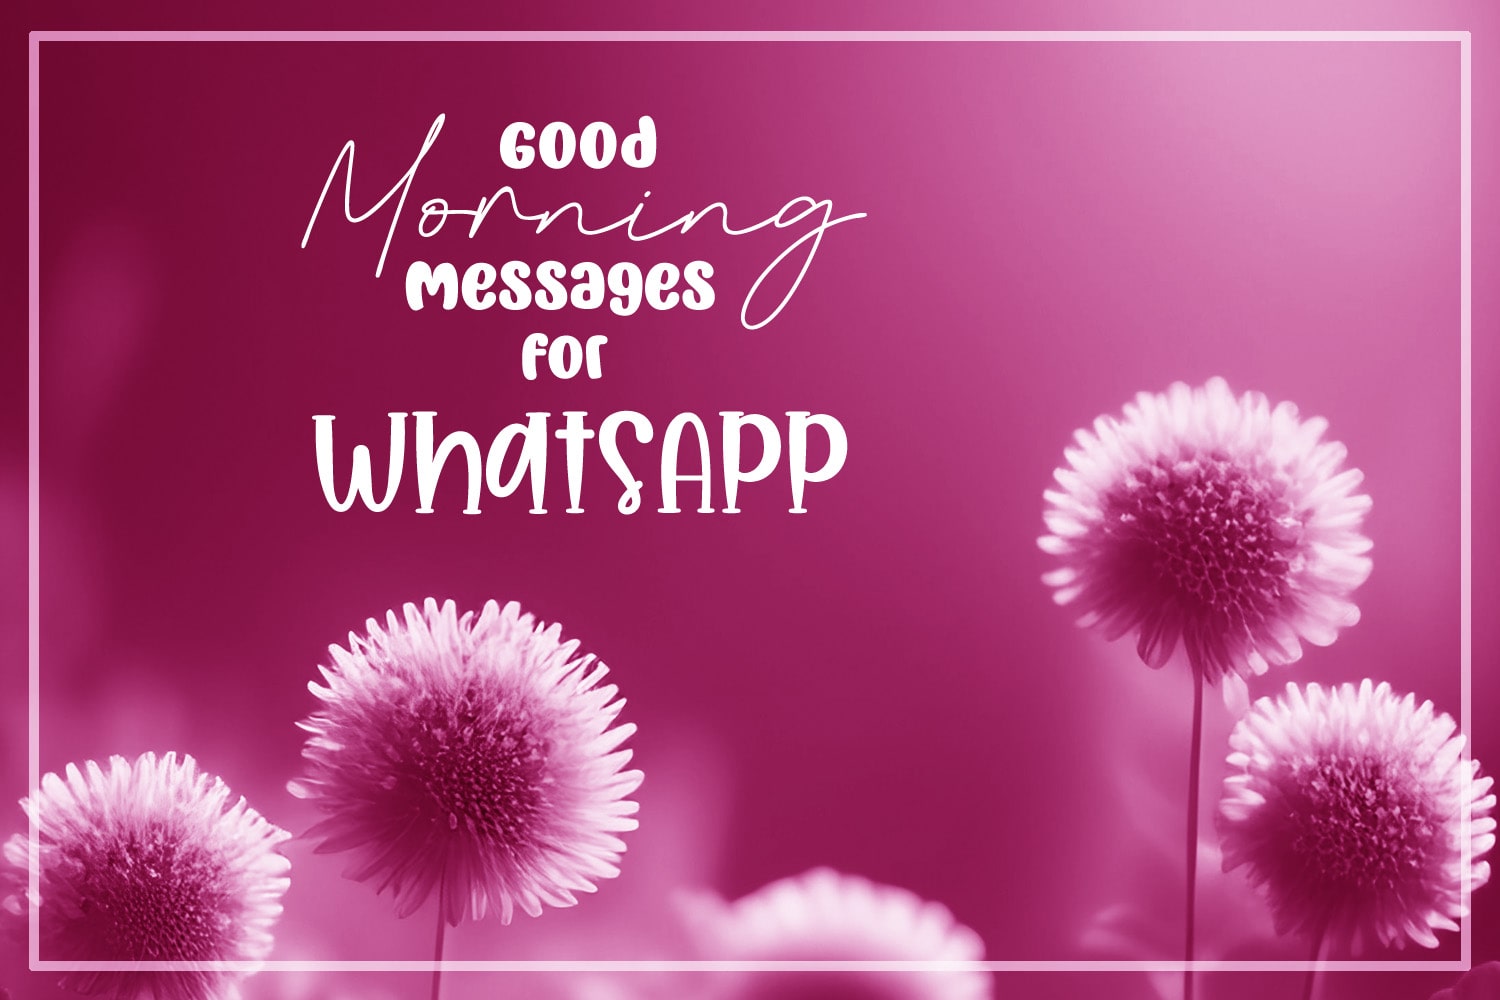 Good Morning Messages for WhatsApp